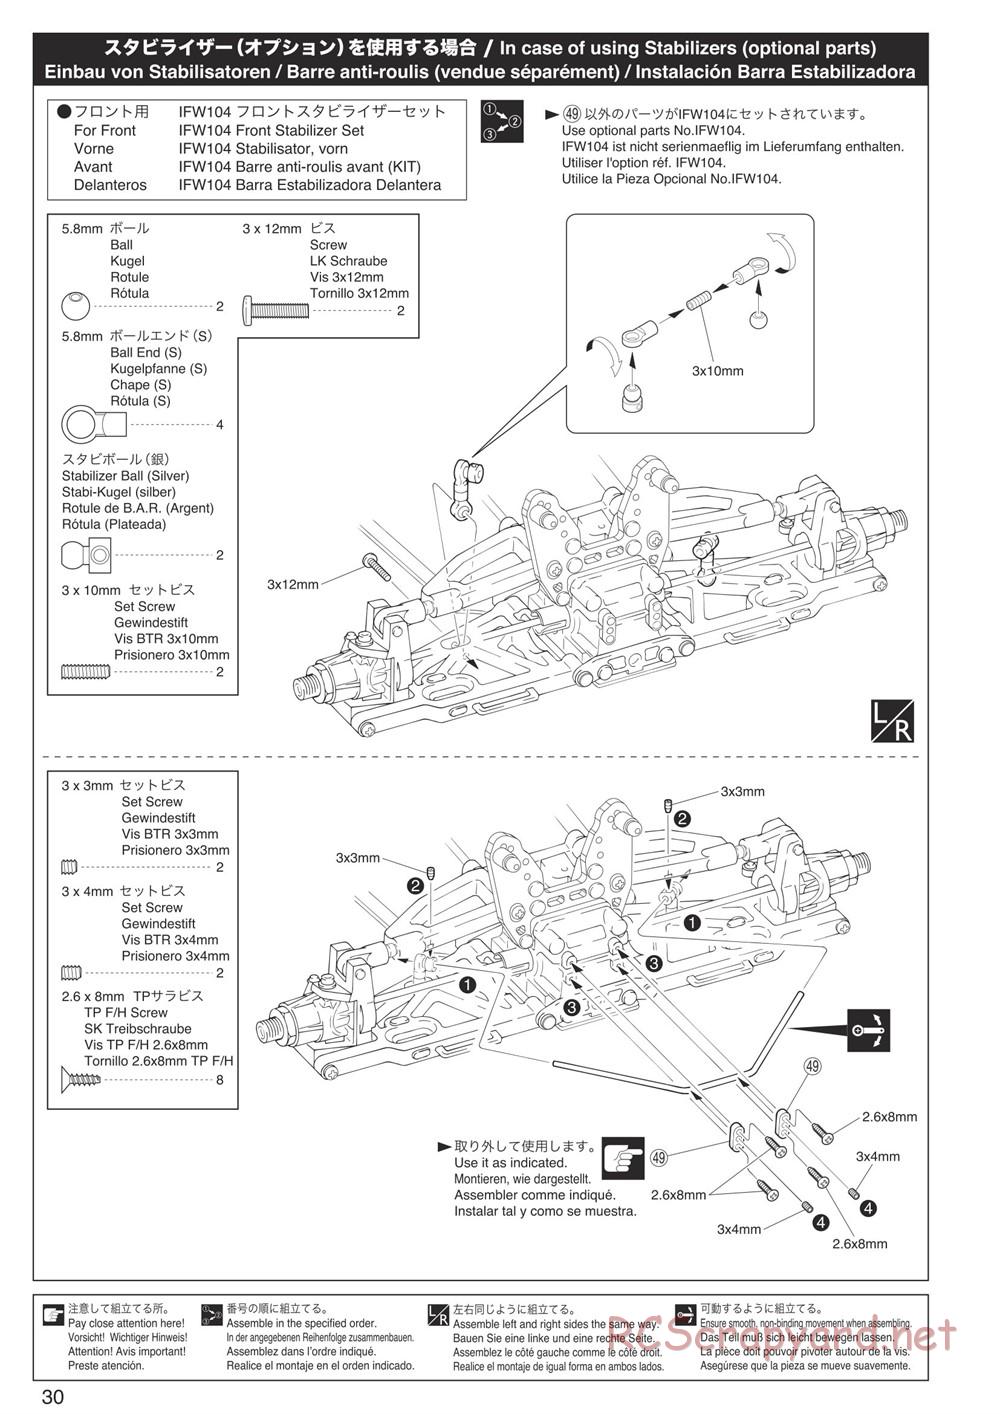 Kyosho - Inferno Neo 3.0 - Manual - Page 29